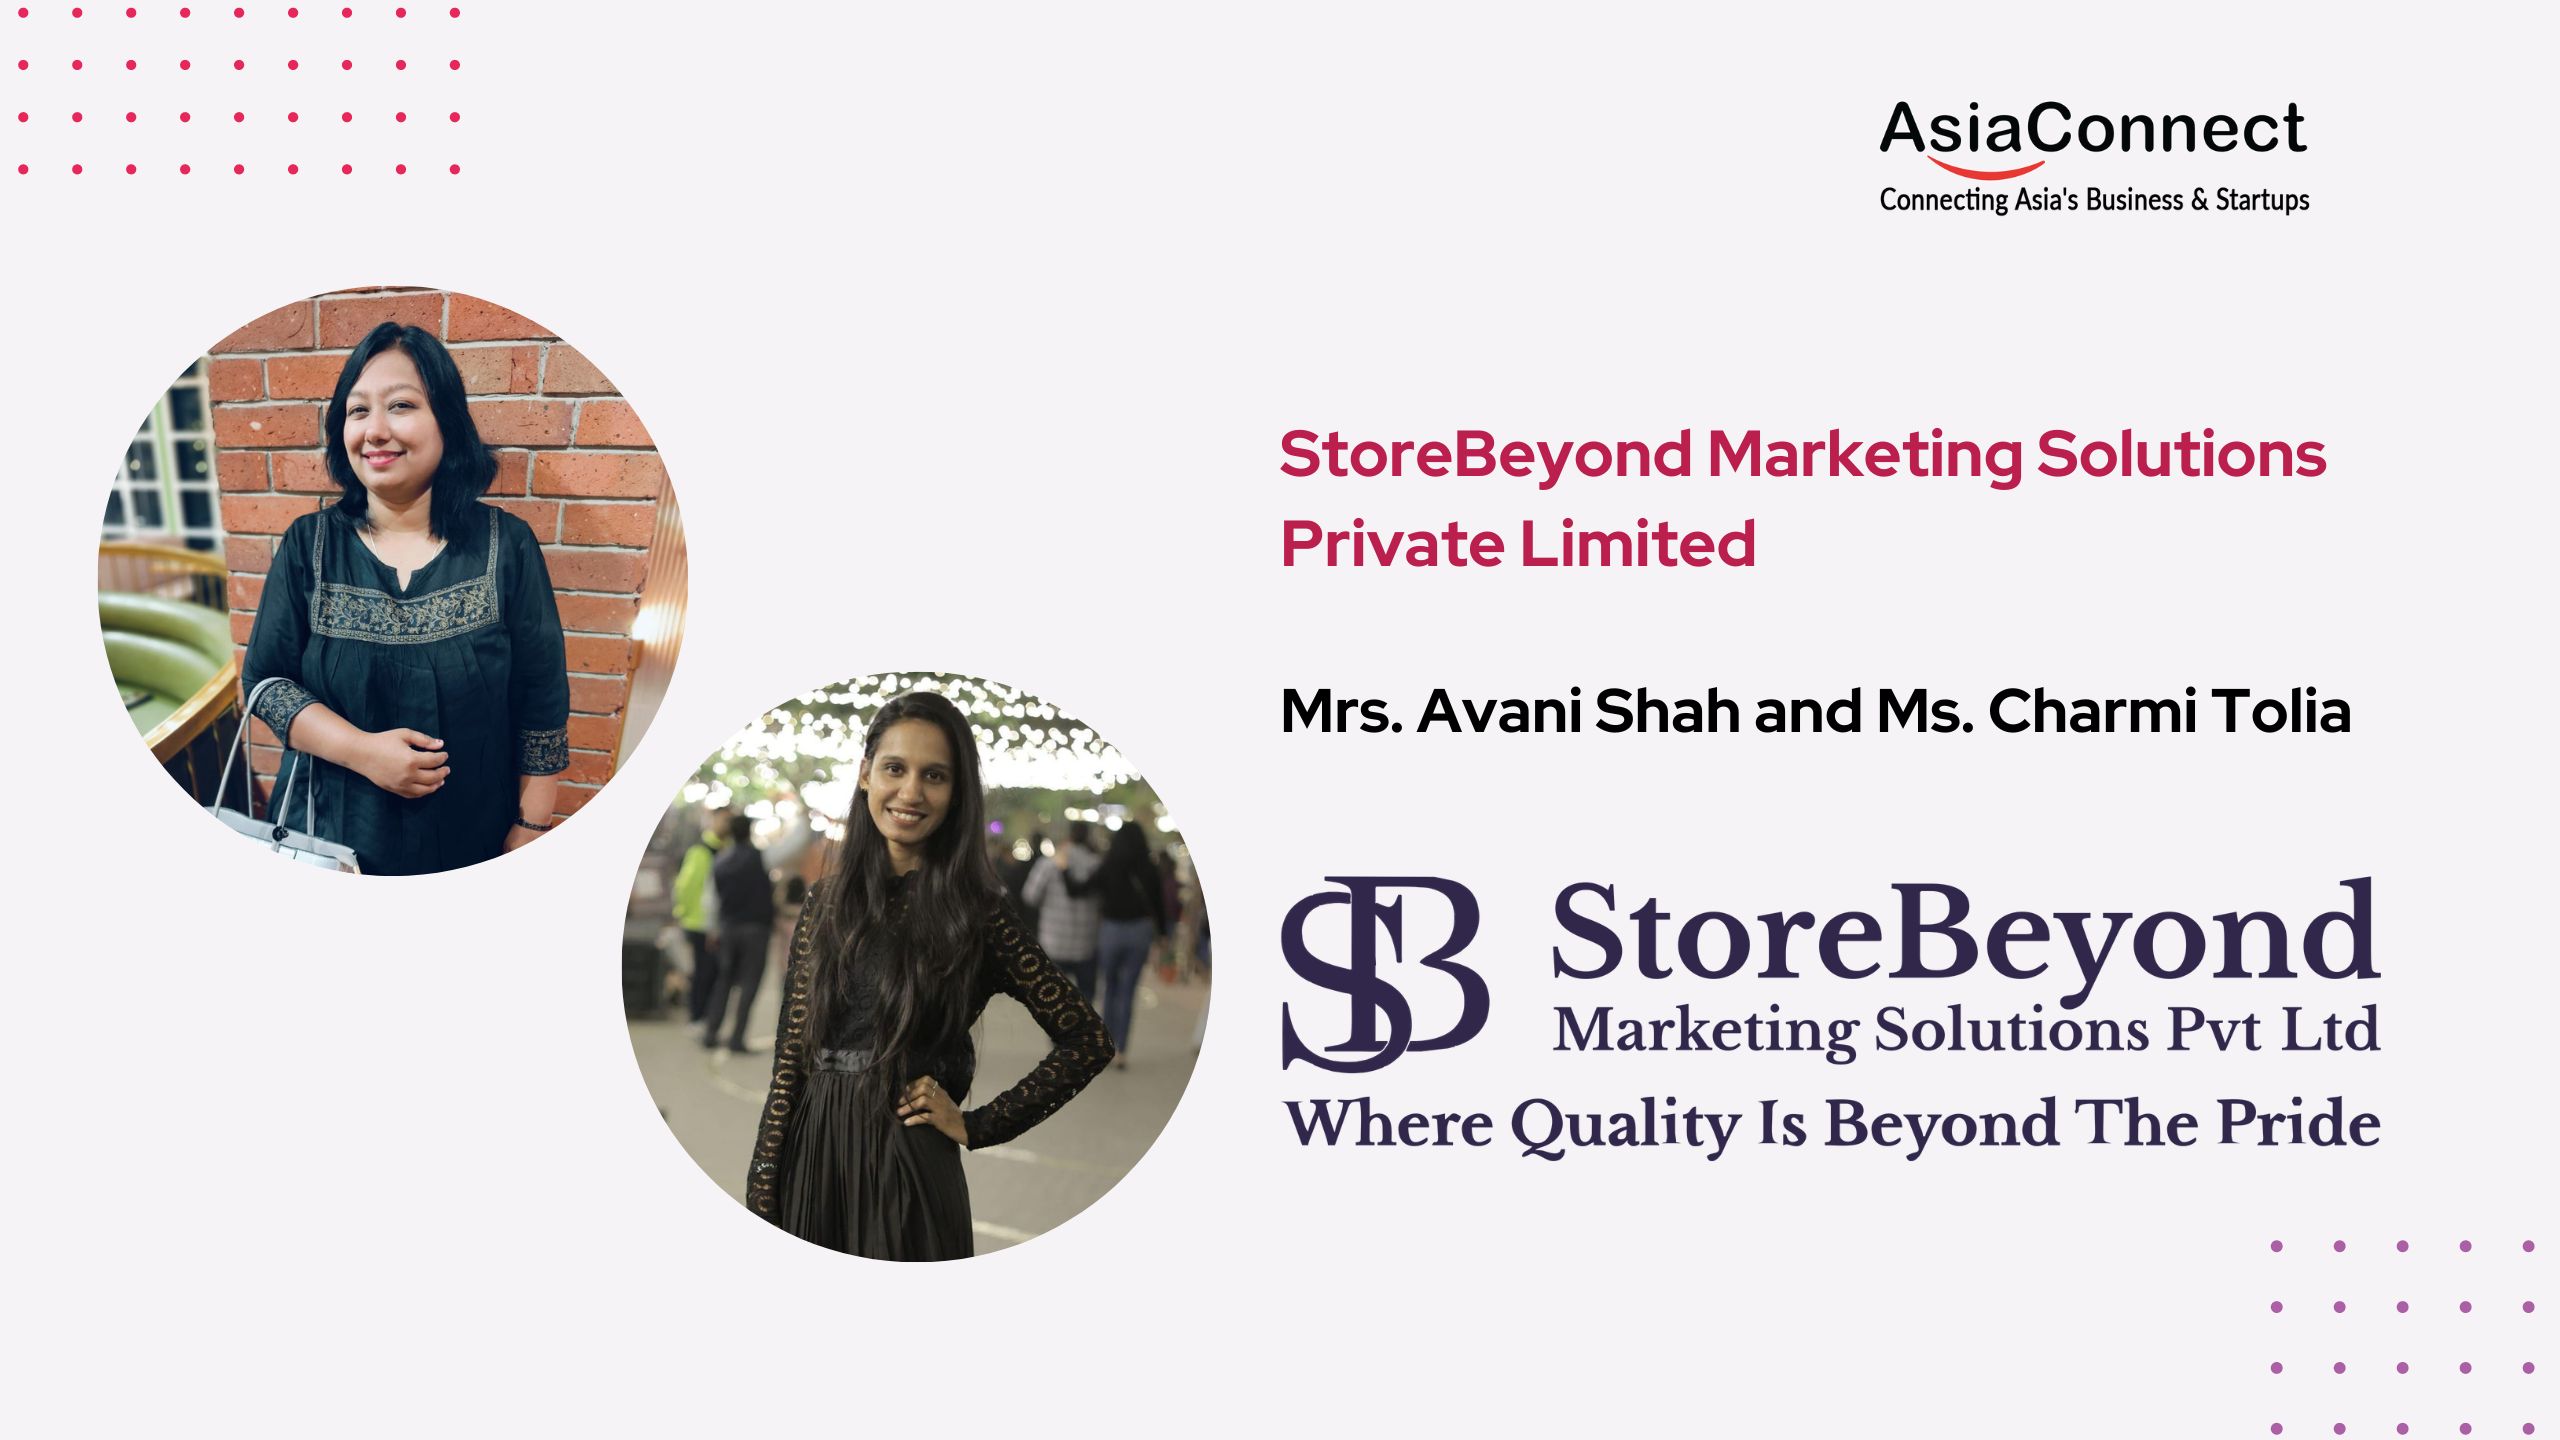 StoreBeyond Marketing Solutions Private Limited: Empowering Businesses to Thrive Online